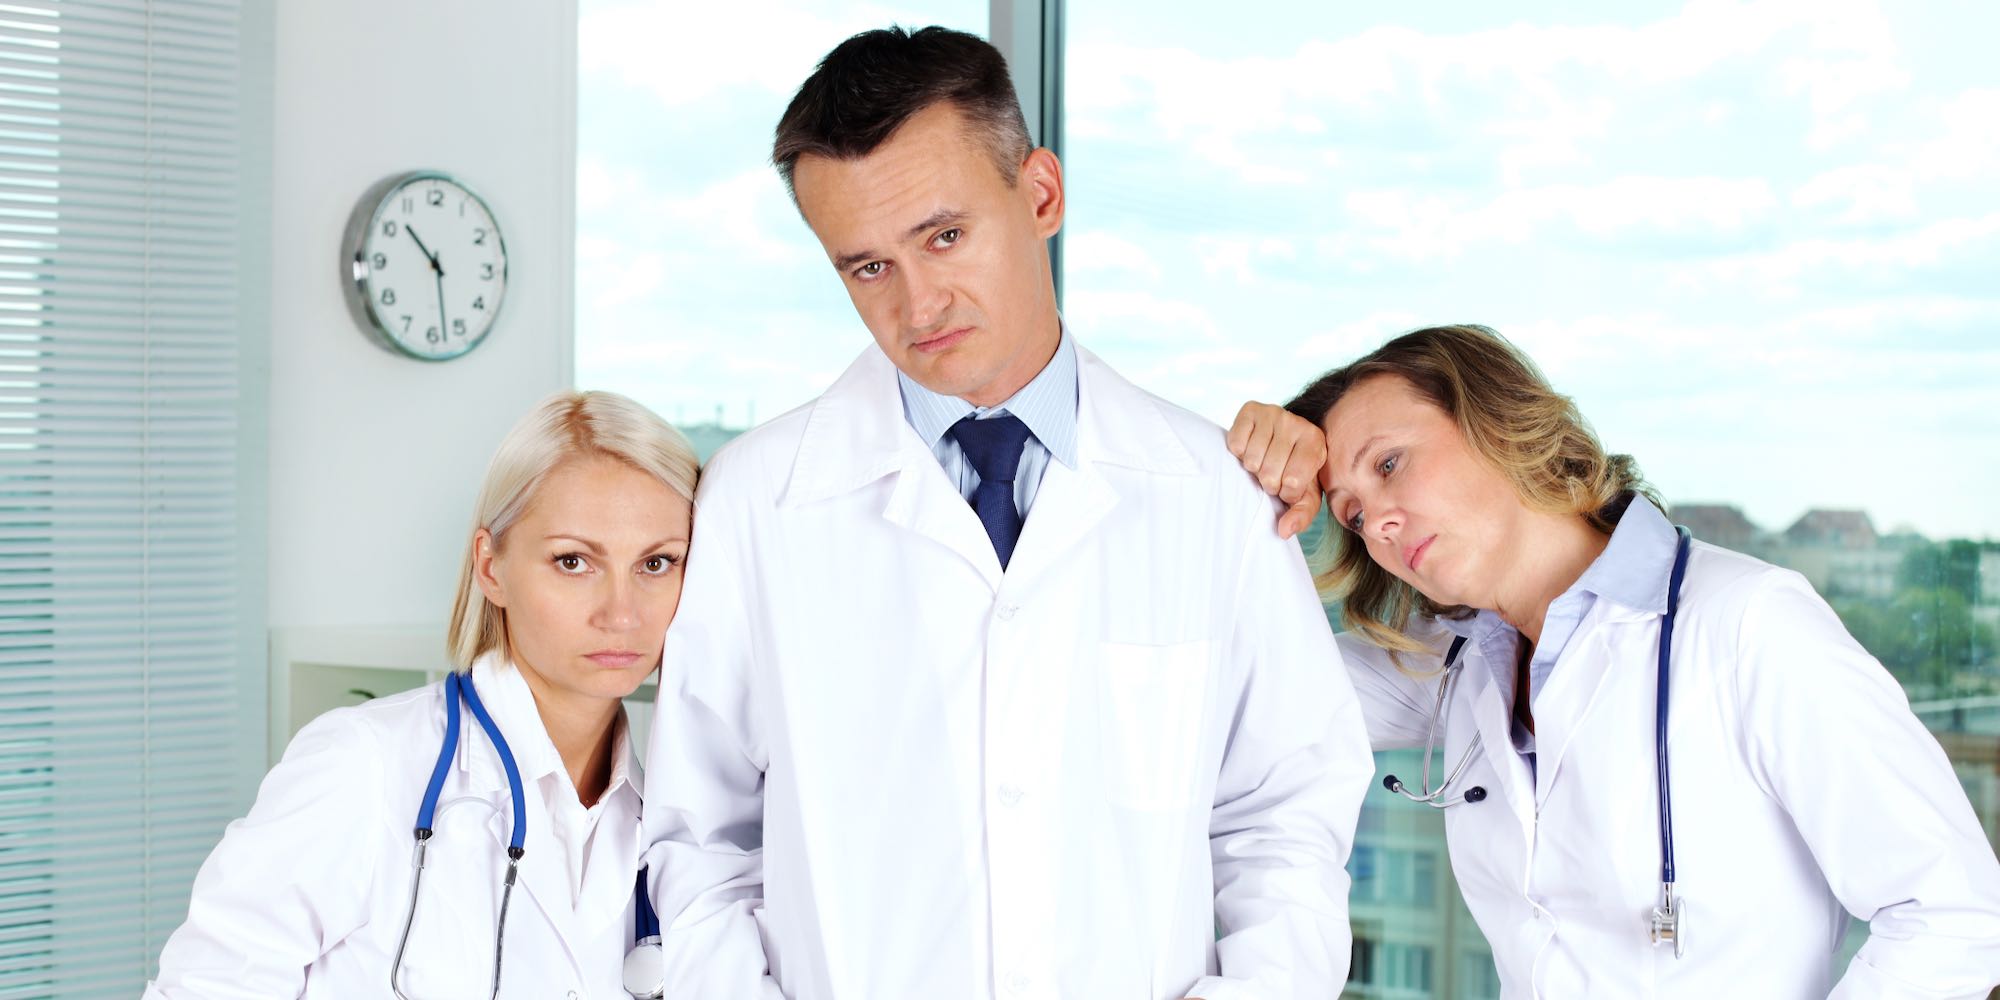 Three doctors in white coats unhappy about The Great Resignation | Vanguard Communications | Denver